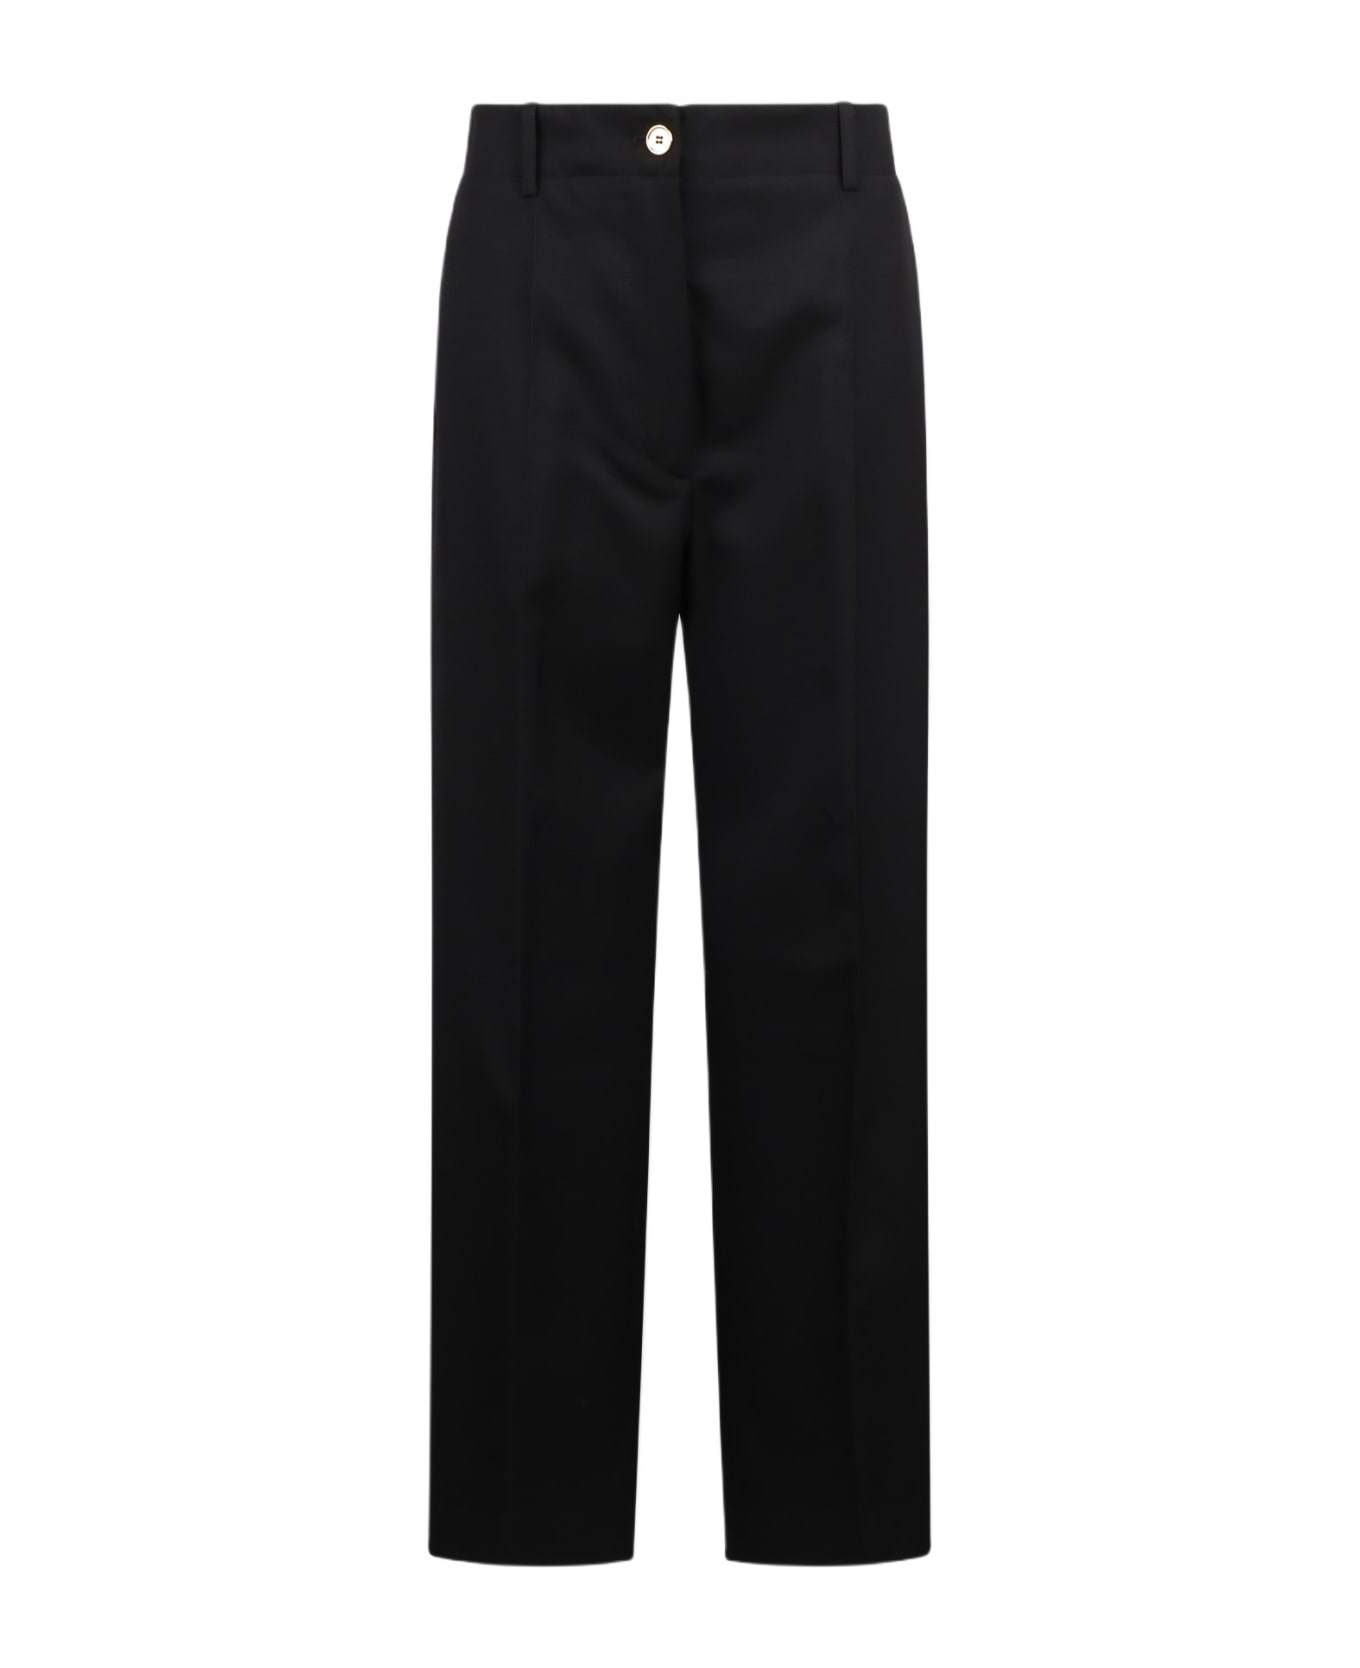 Patou Straight Model Trousers - Black ボトムス